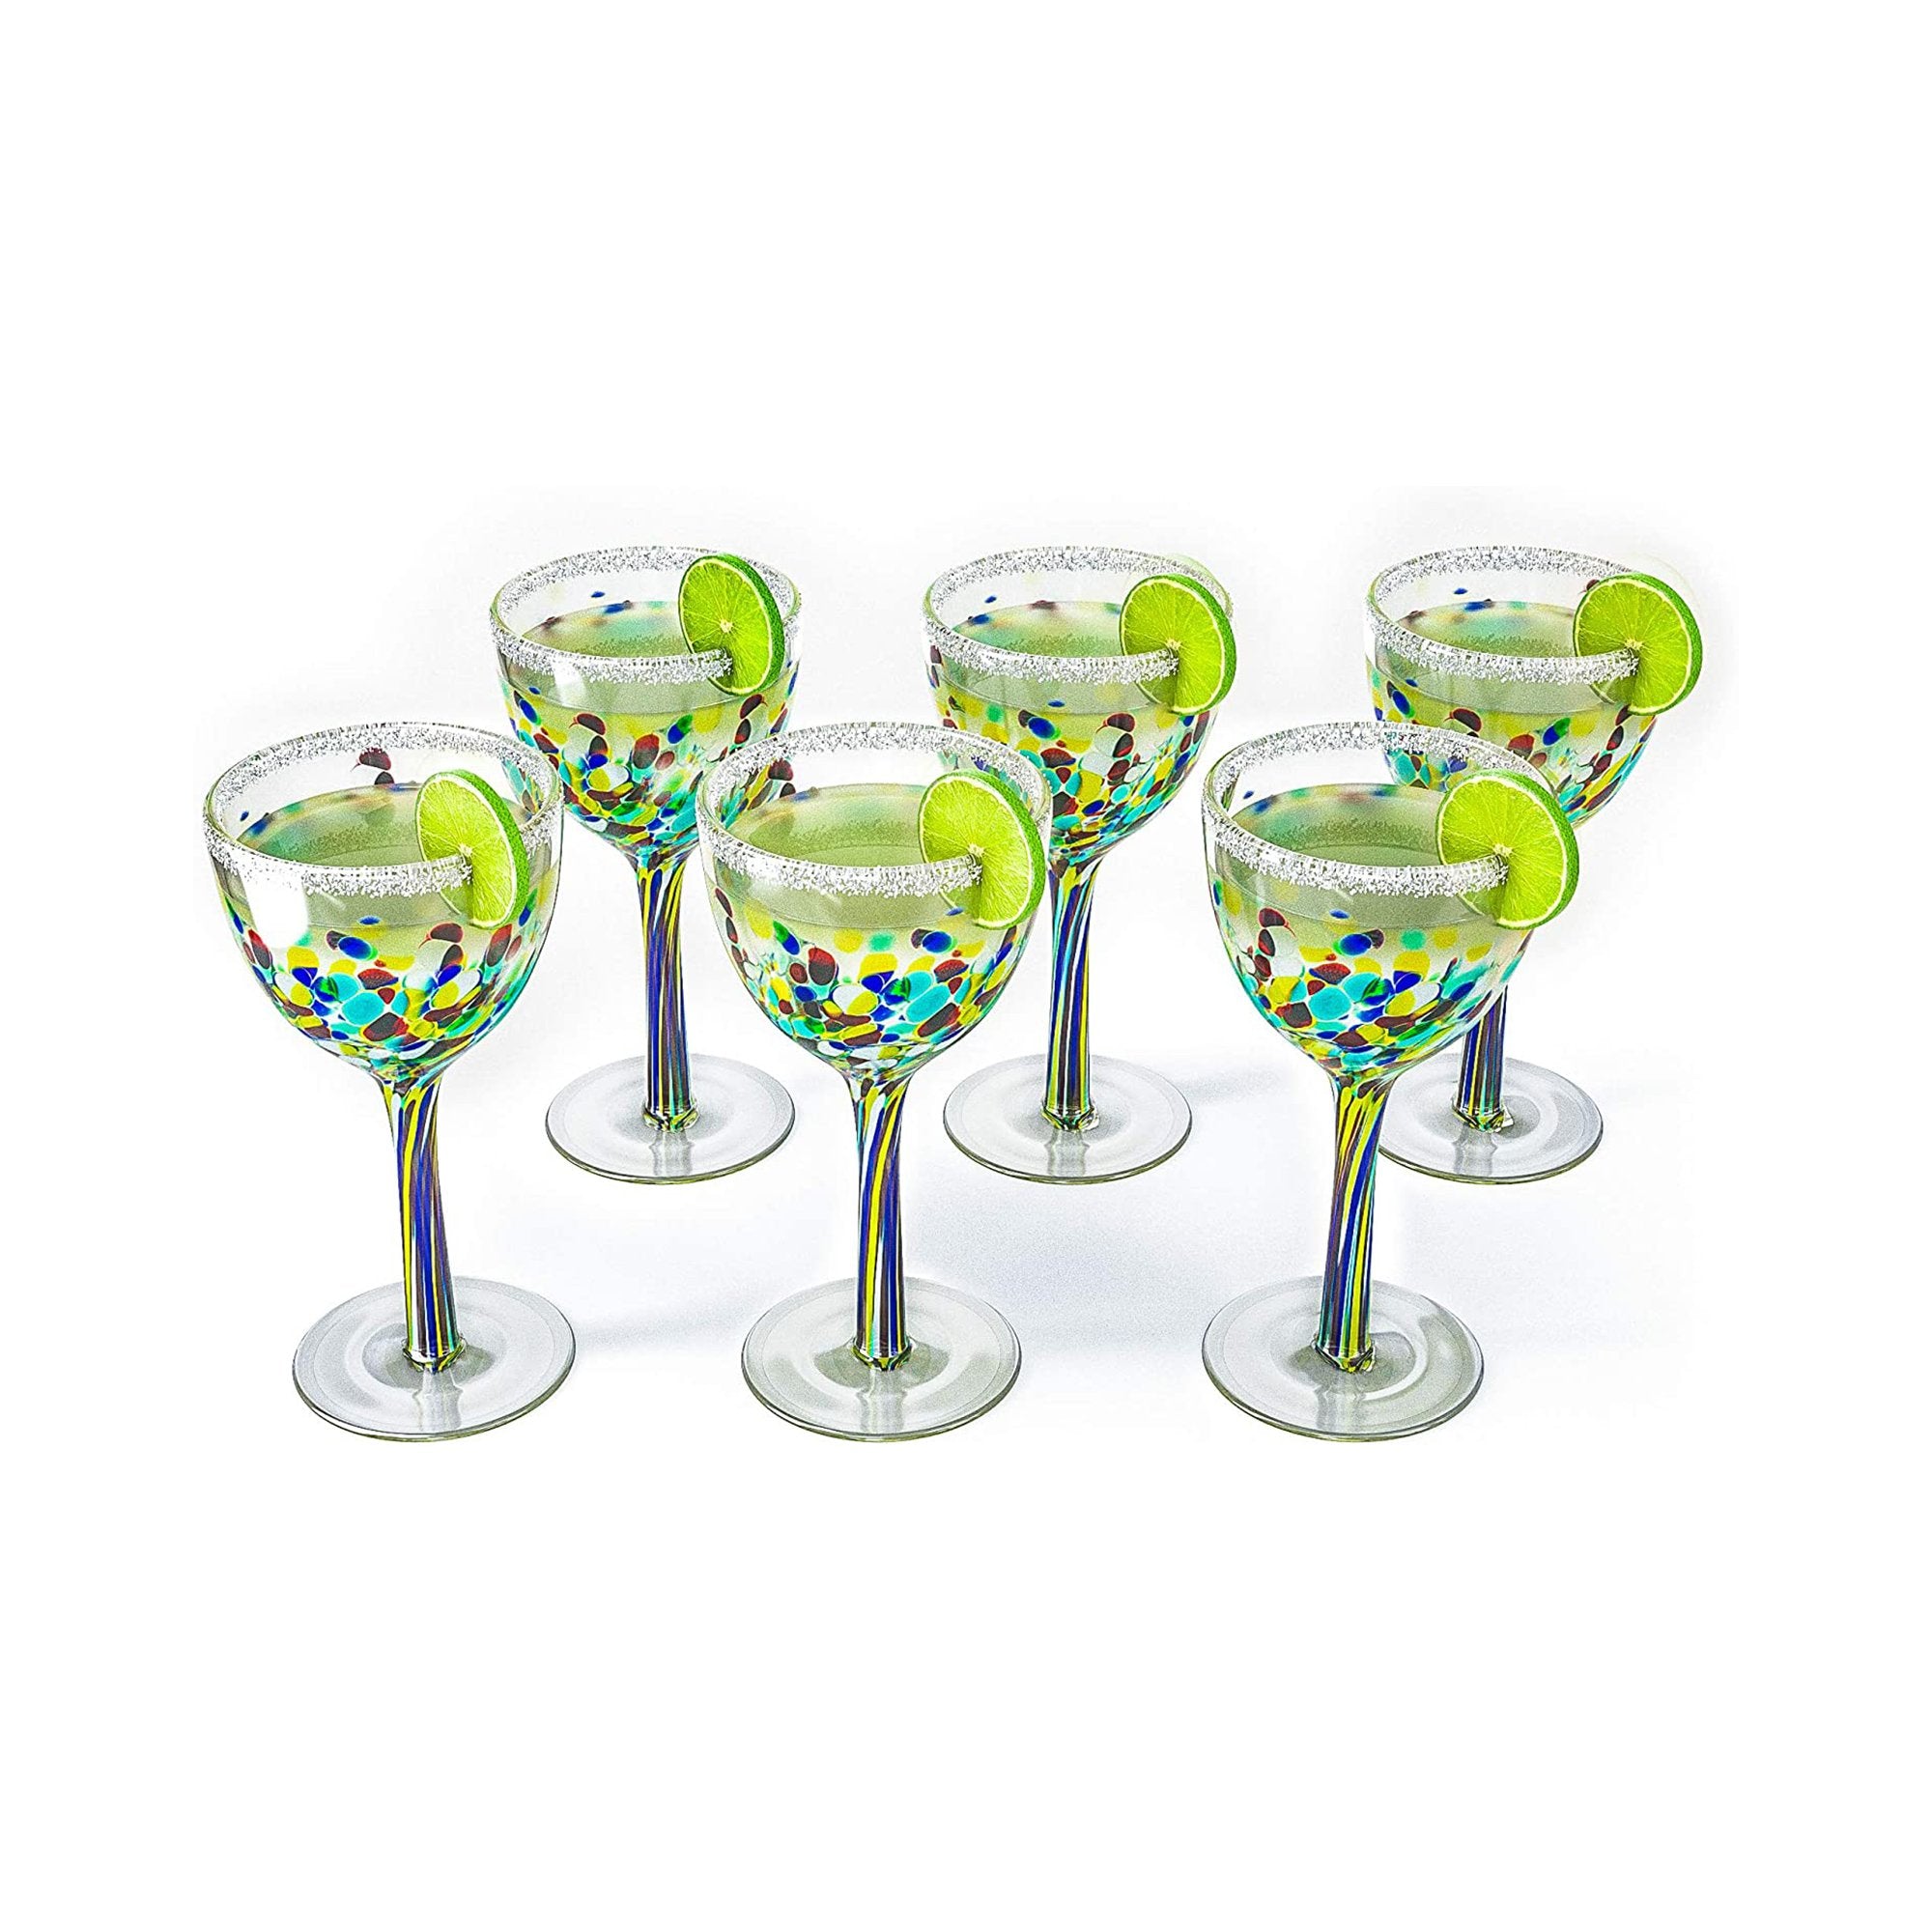 Mexican Wine Glasses Set of 6, Pebble Confetti Mexican Luxury Hand Blown Wine and Water Glasses (8 ounces each)